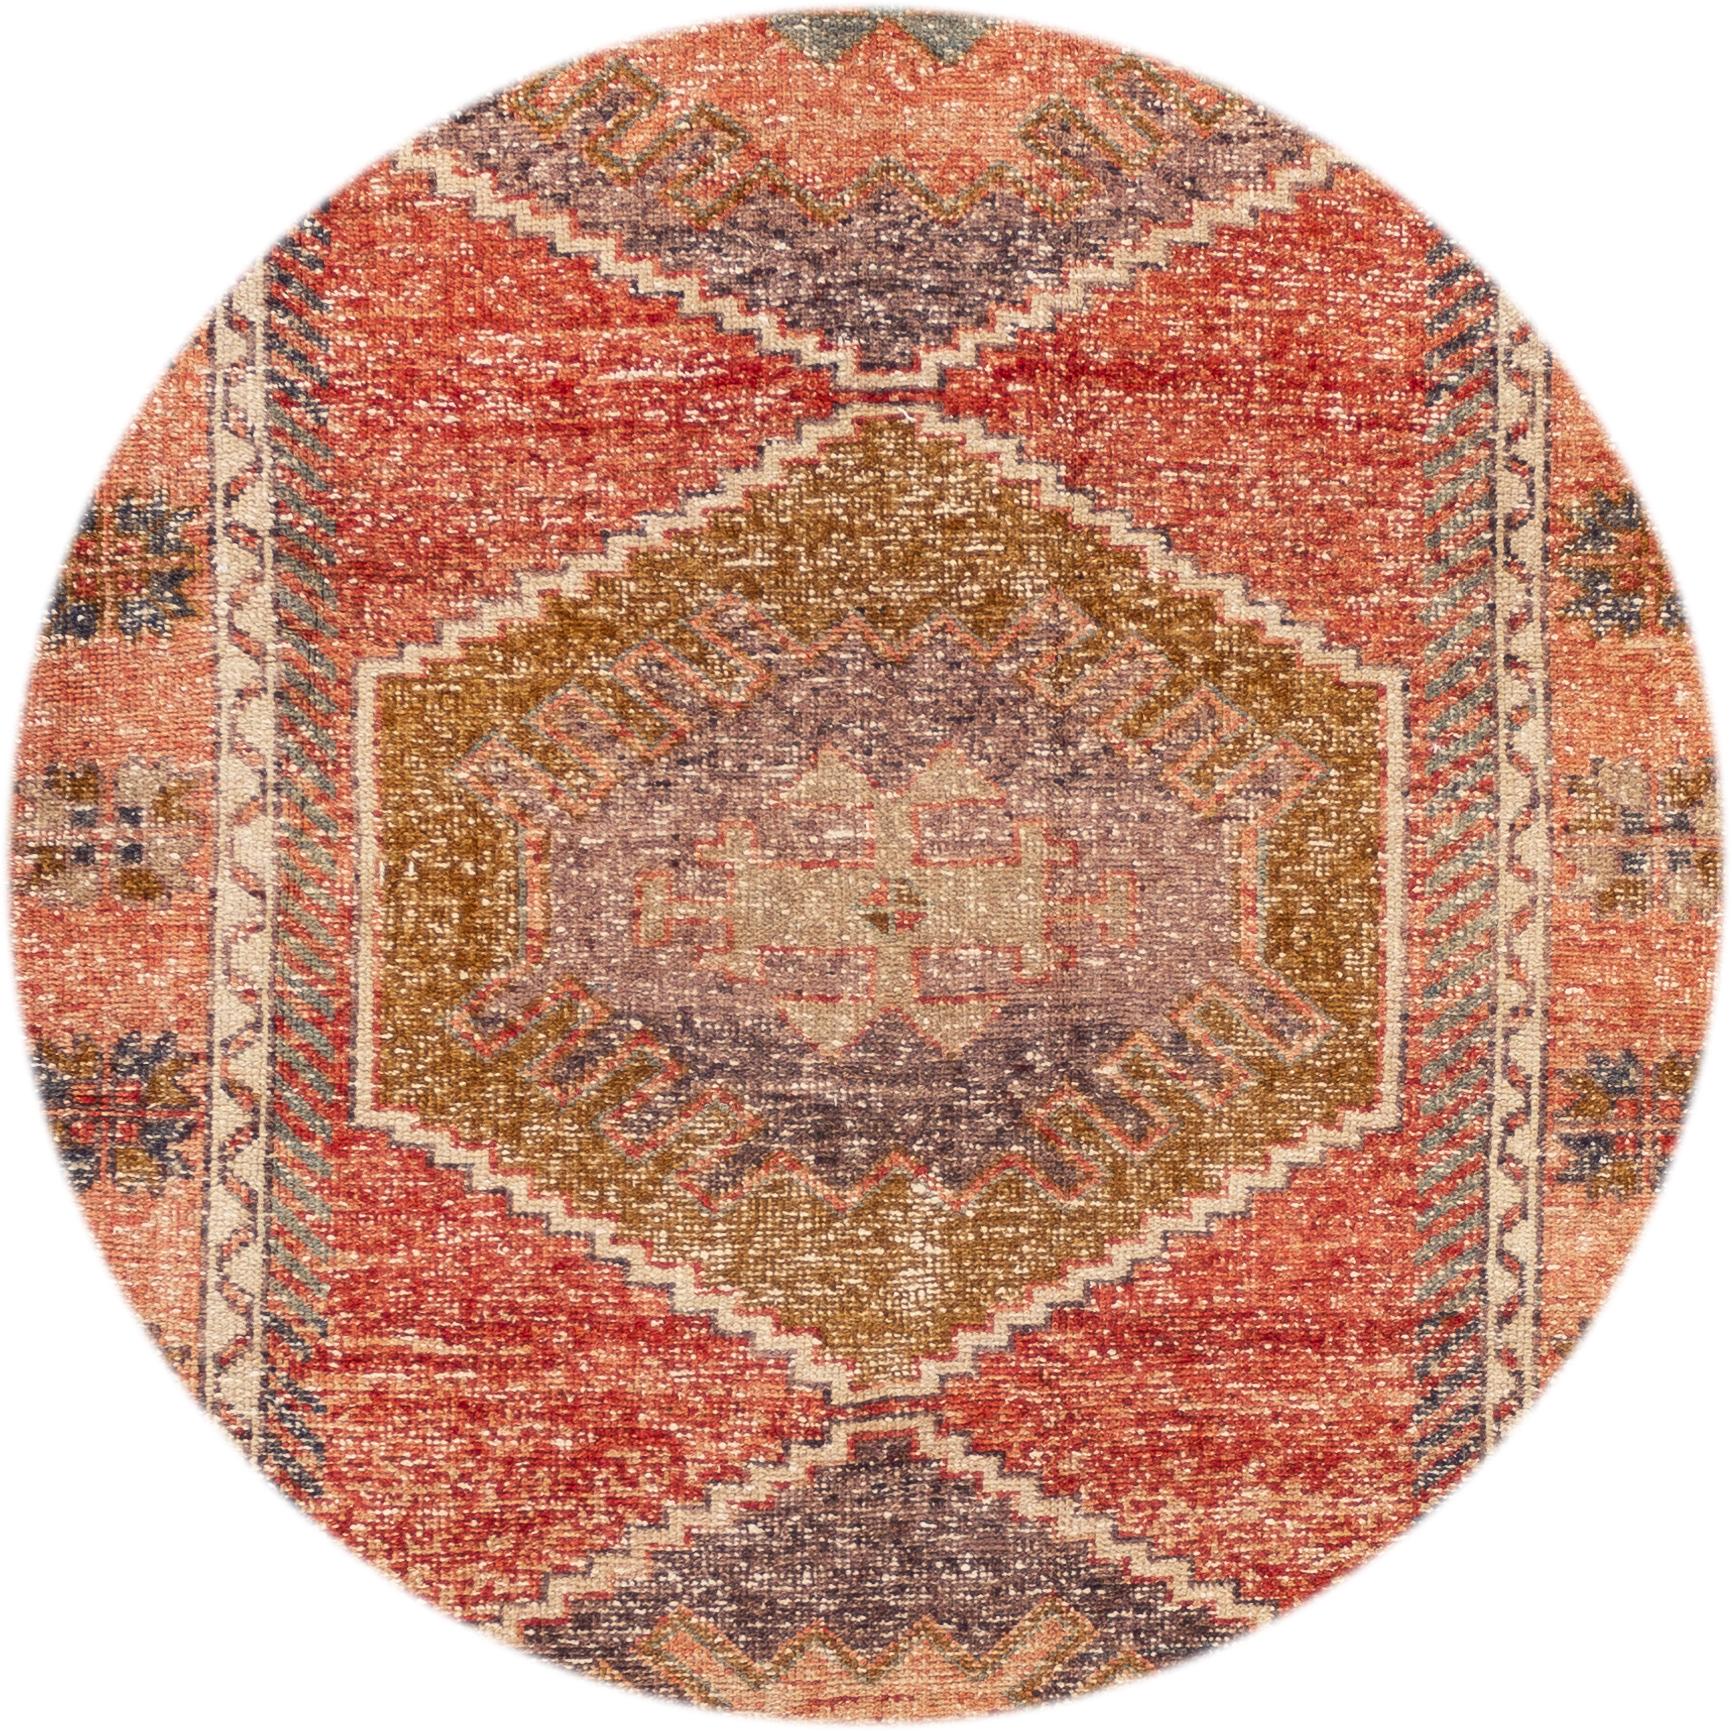 Beautiful antique Turkish Anatolian runner rug, hand knotted wool with a red field, brown and orange accents in multi medallion design.
This rug measures 3' 10